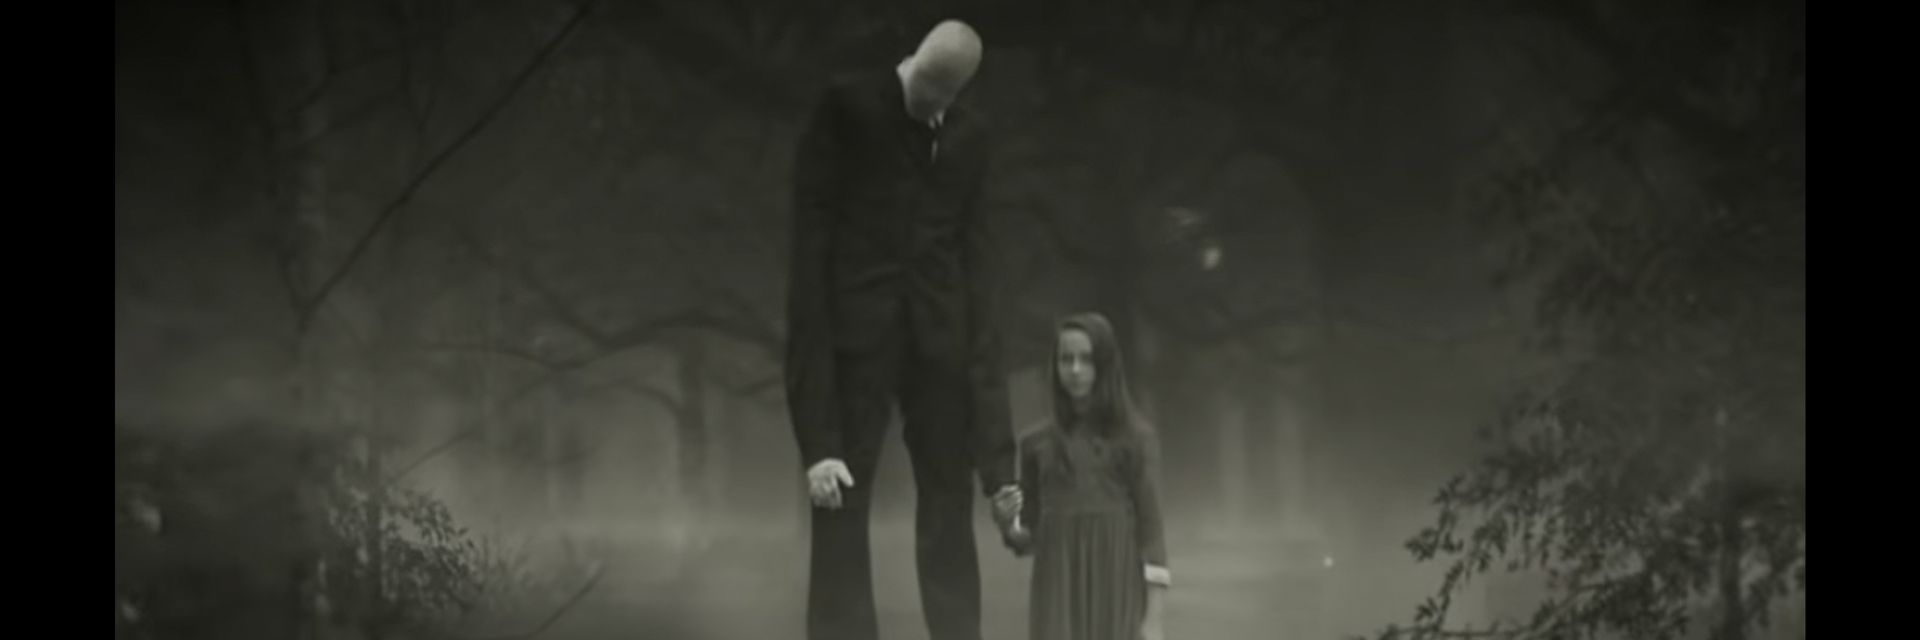 Blame the Game&#63; The Slender Man Controversy